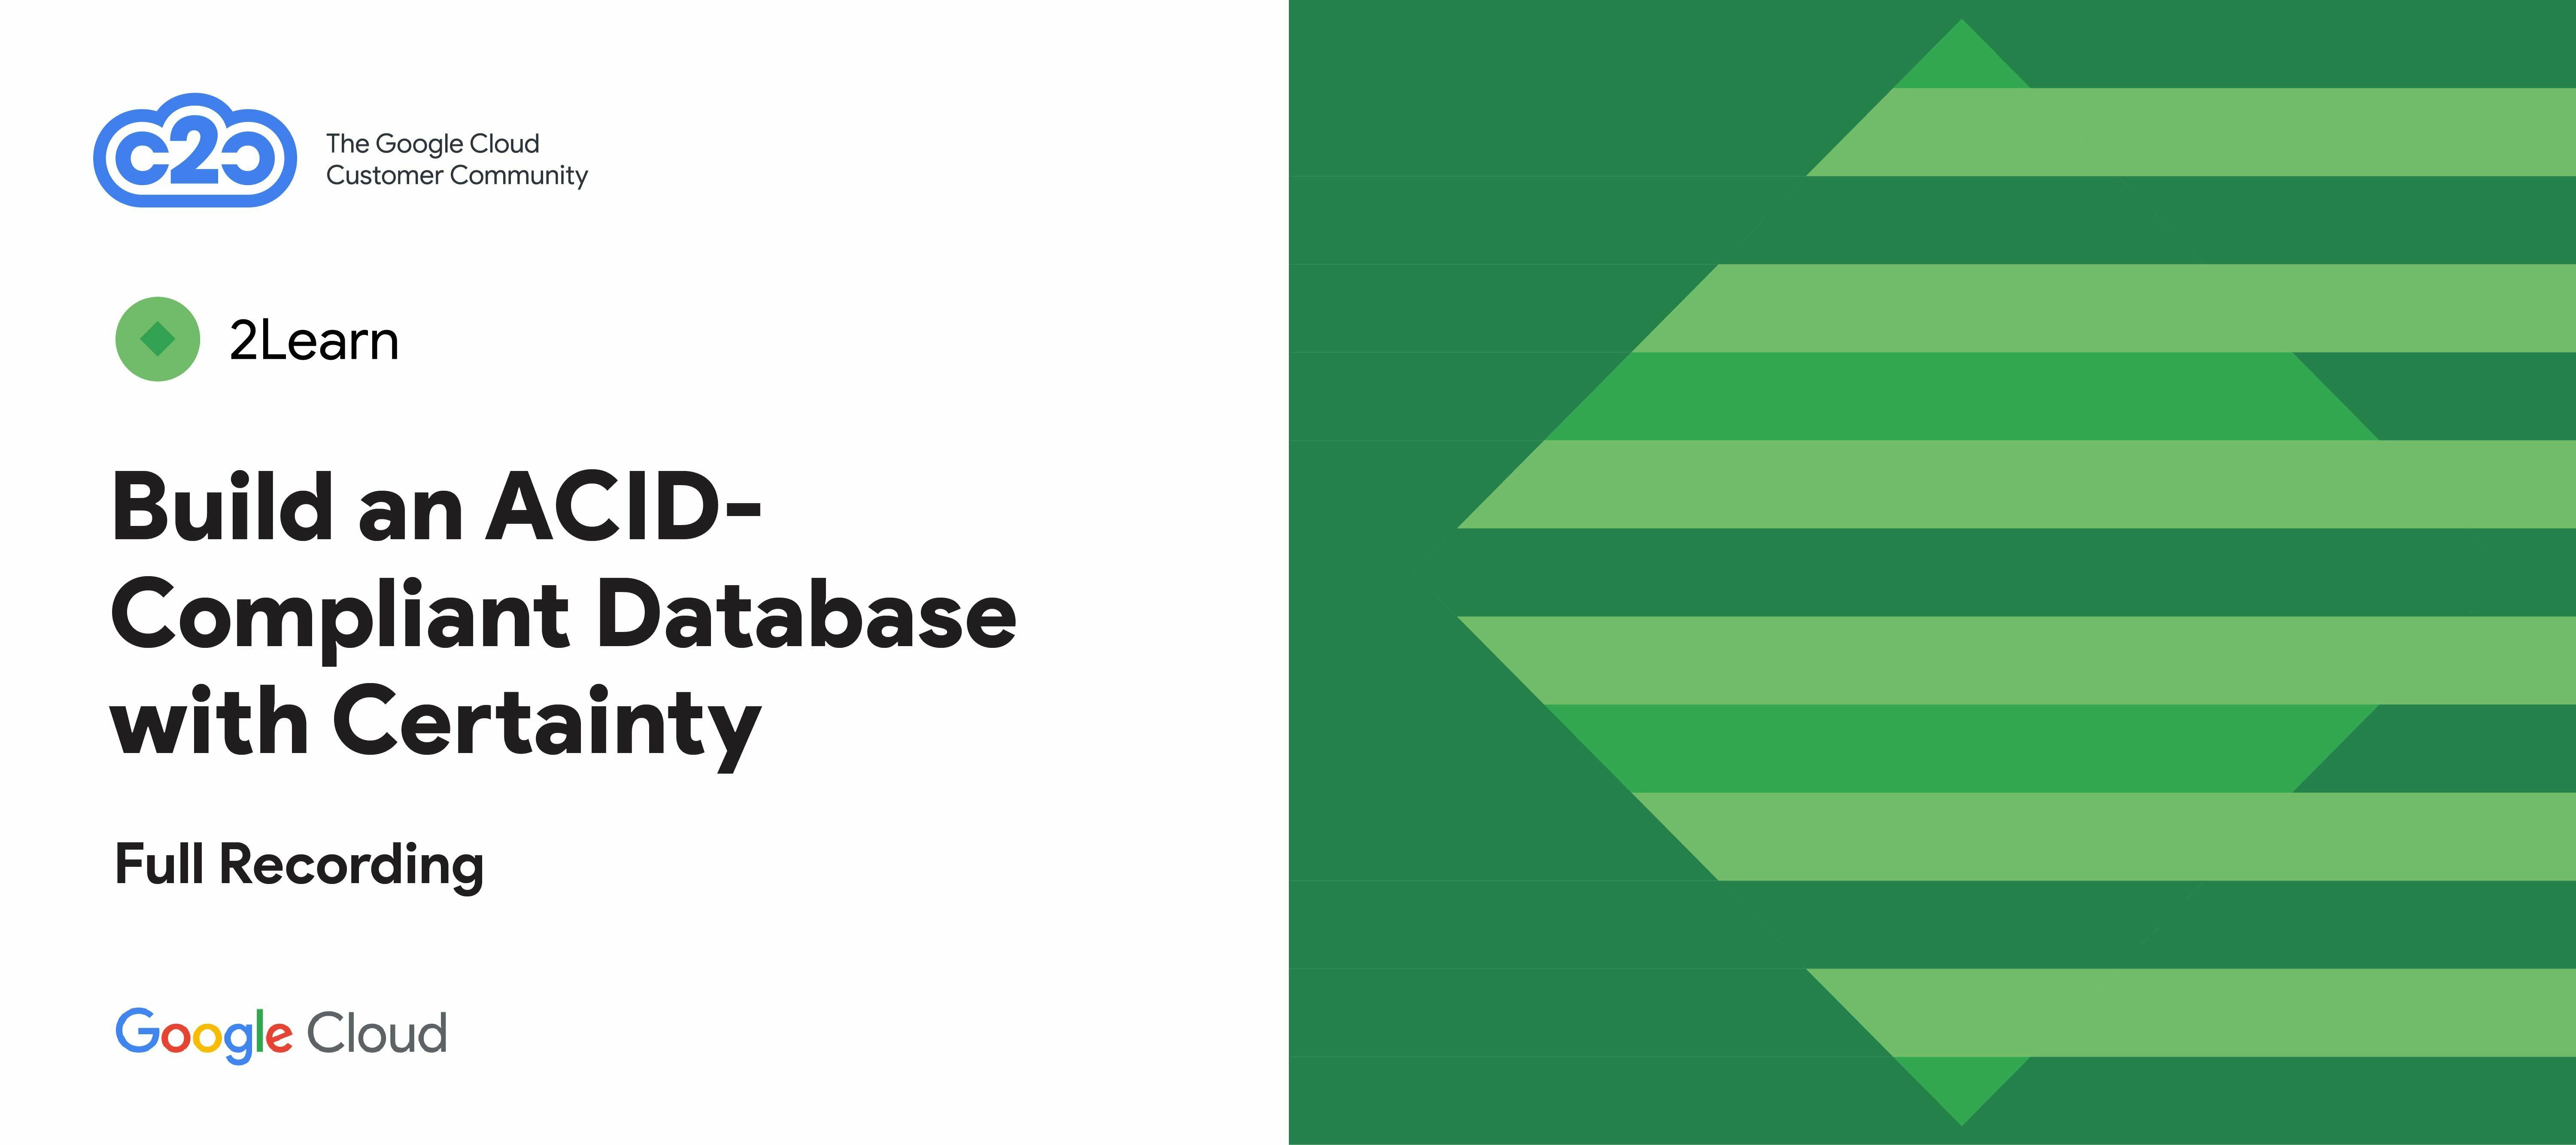 Build an ACID-Compliant Database with Certainty (full recording)